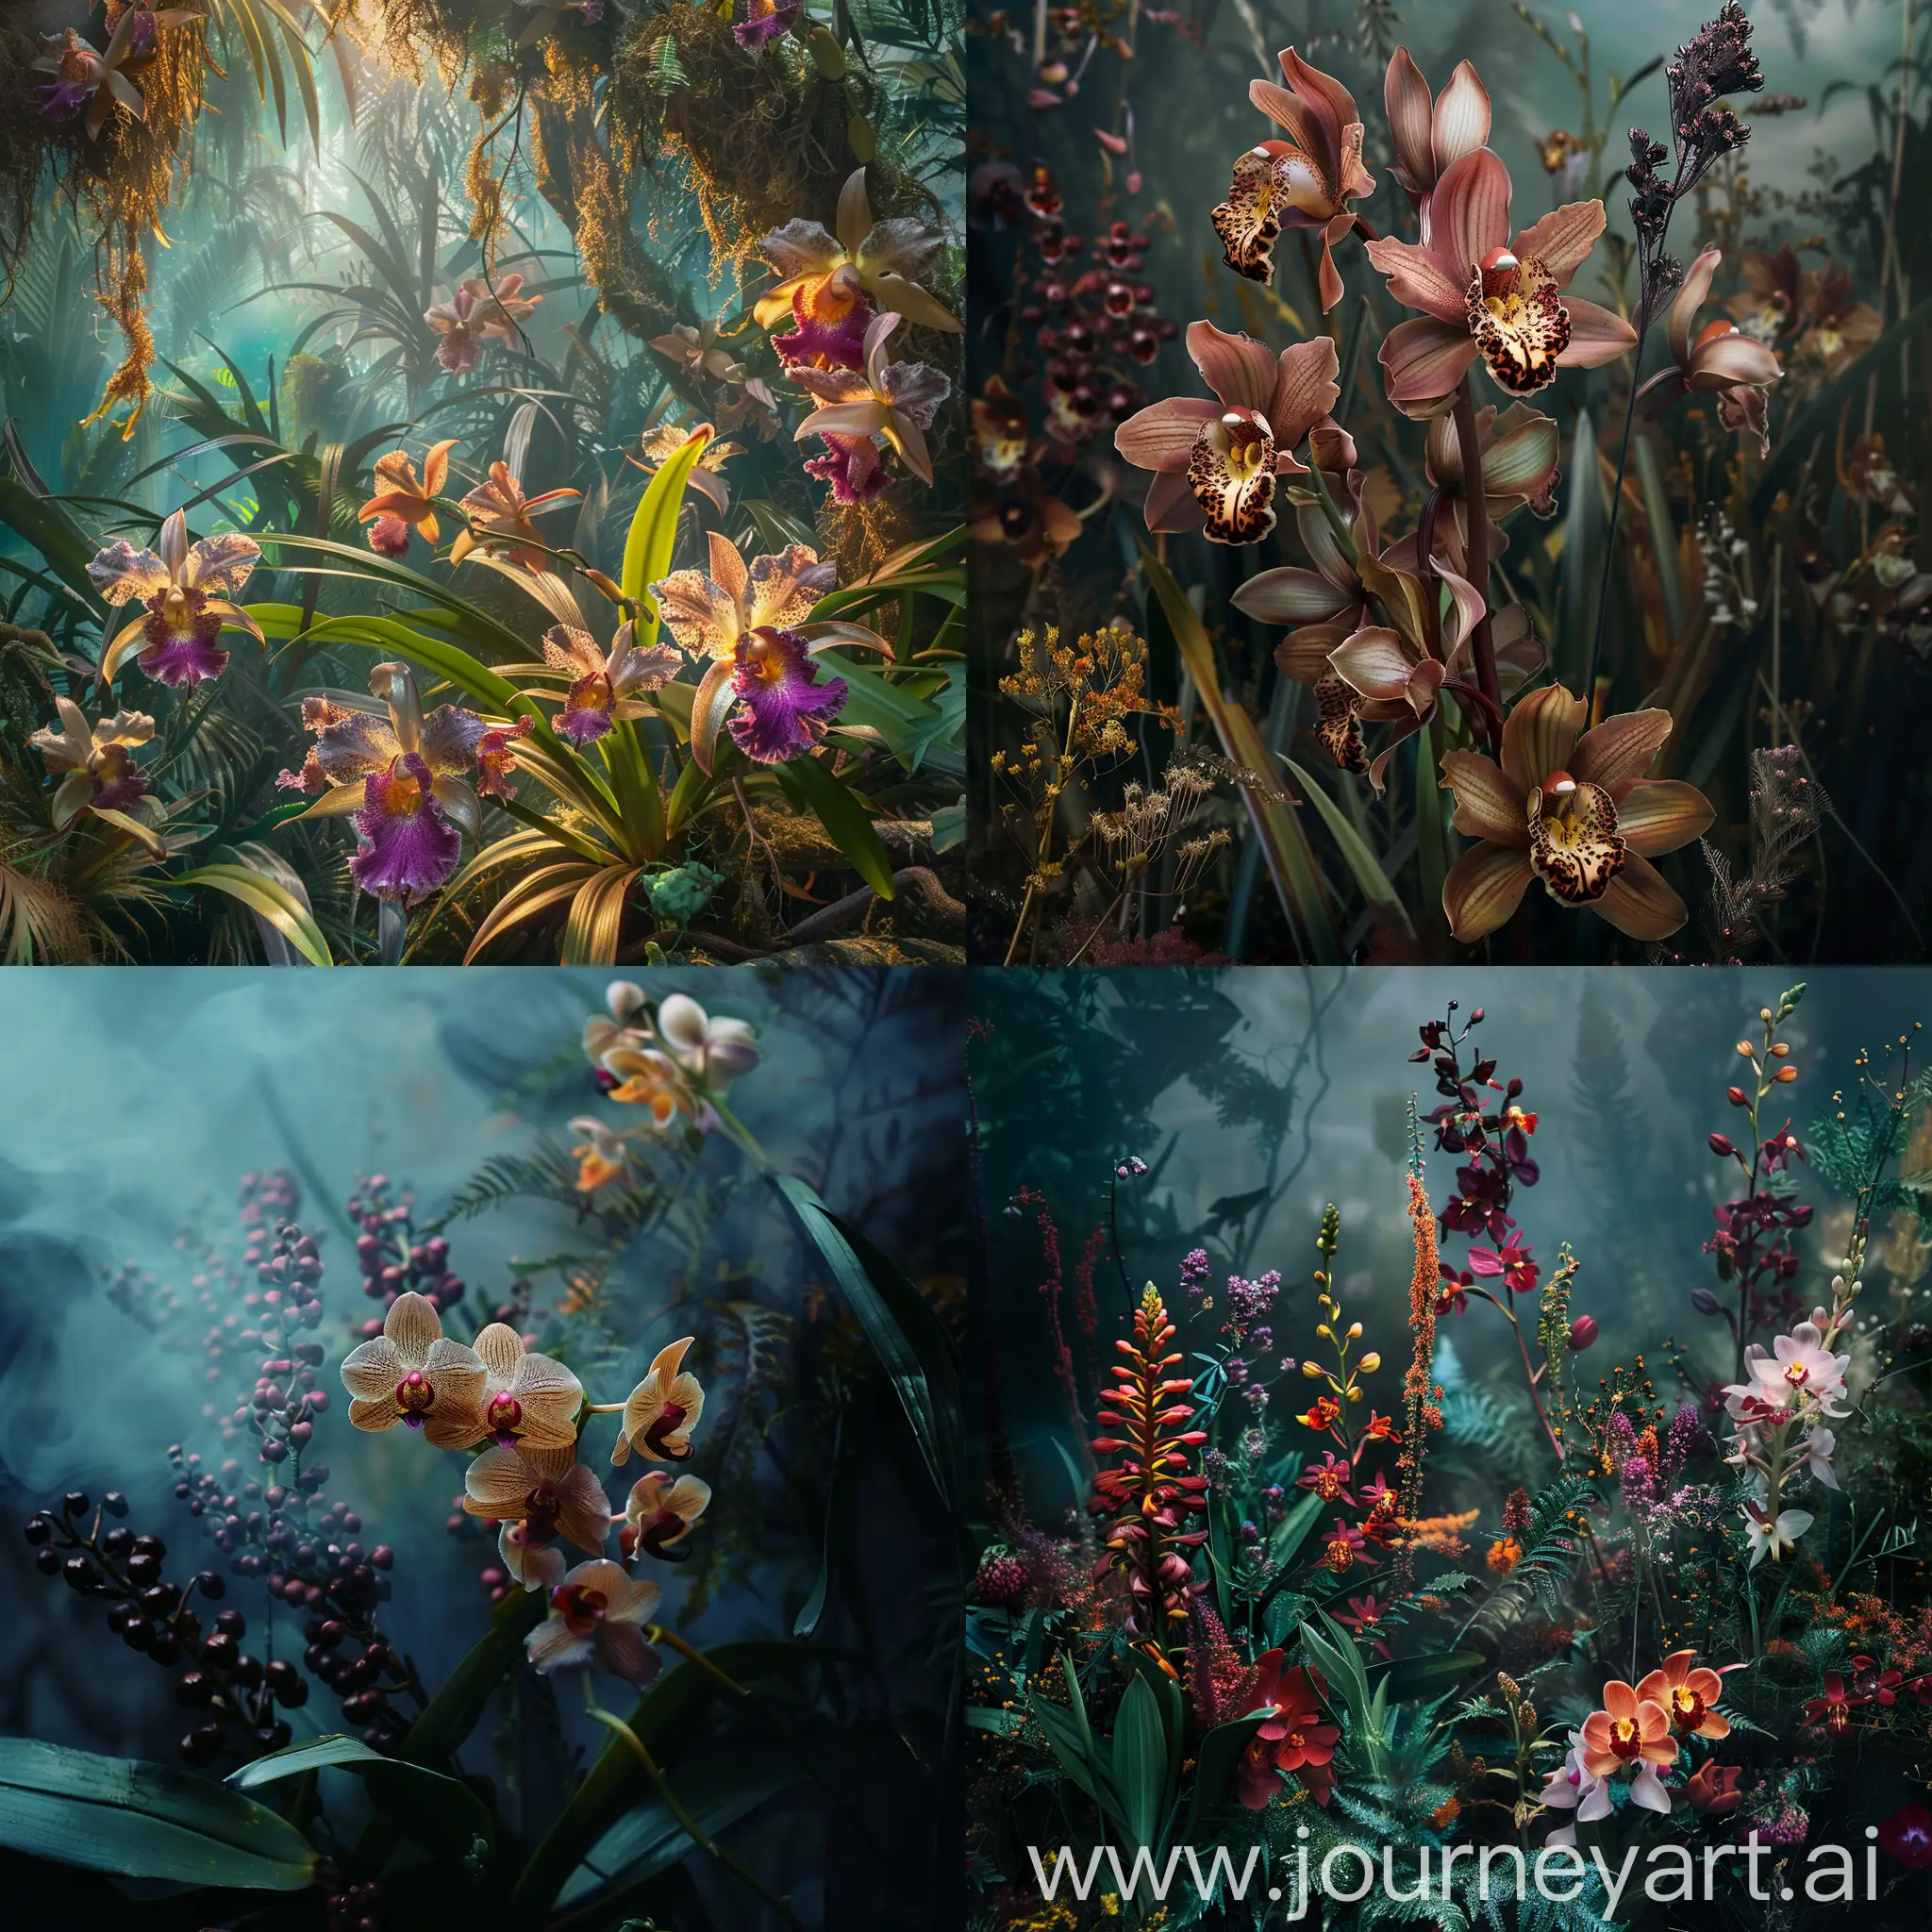 Enchanted-Wild-Orchids-in-a-Fantasy-Atmosphere